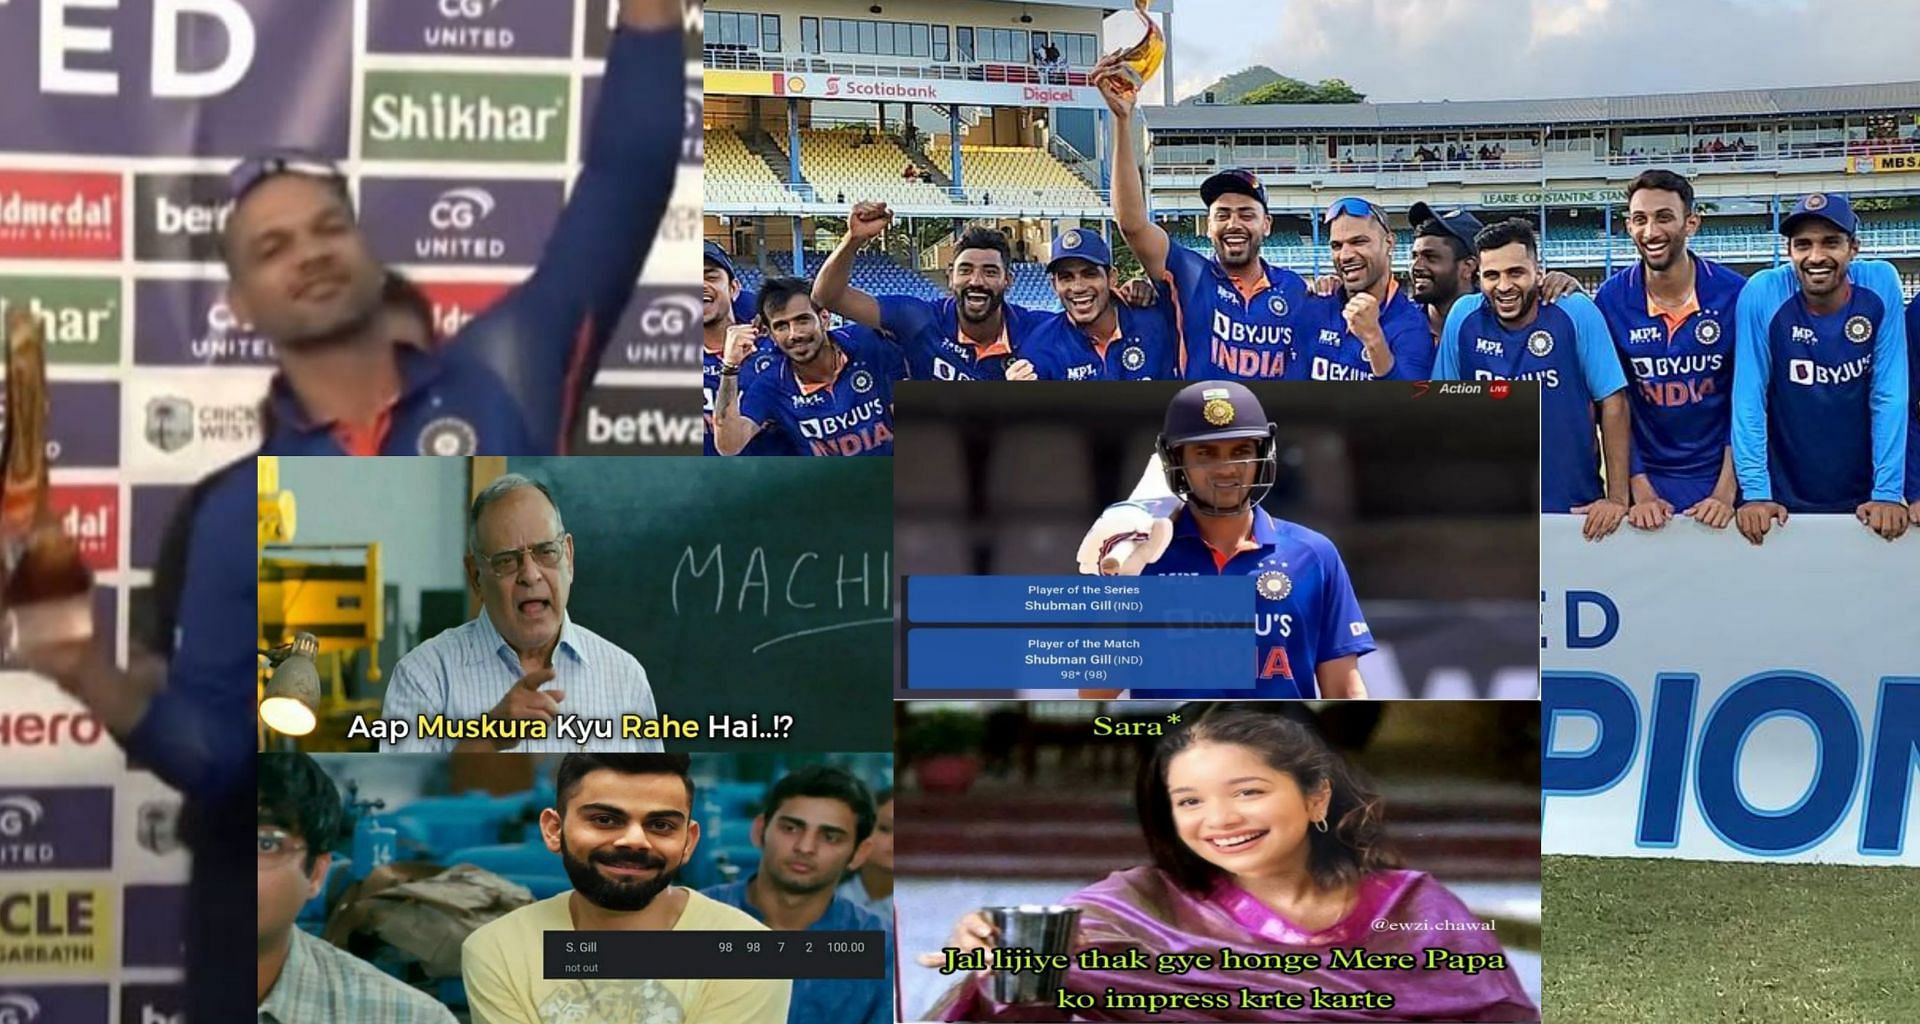 Fans react after Team India wins the series 3-0